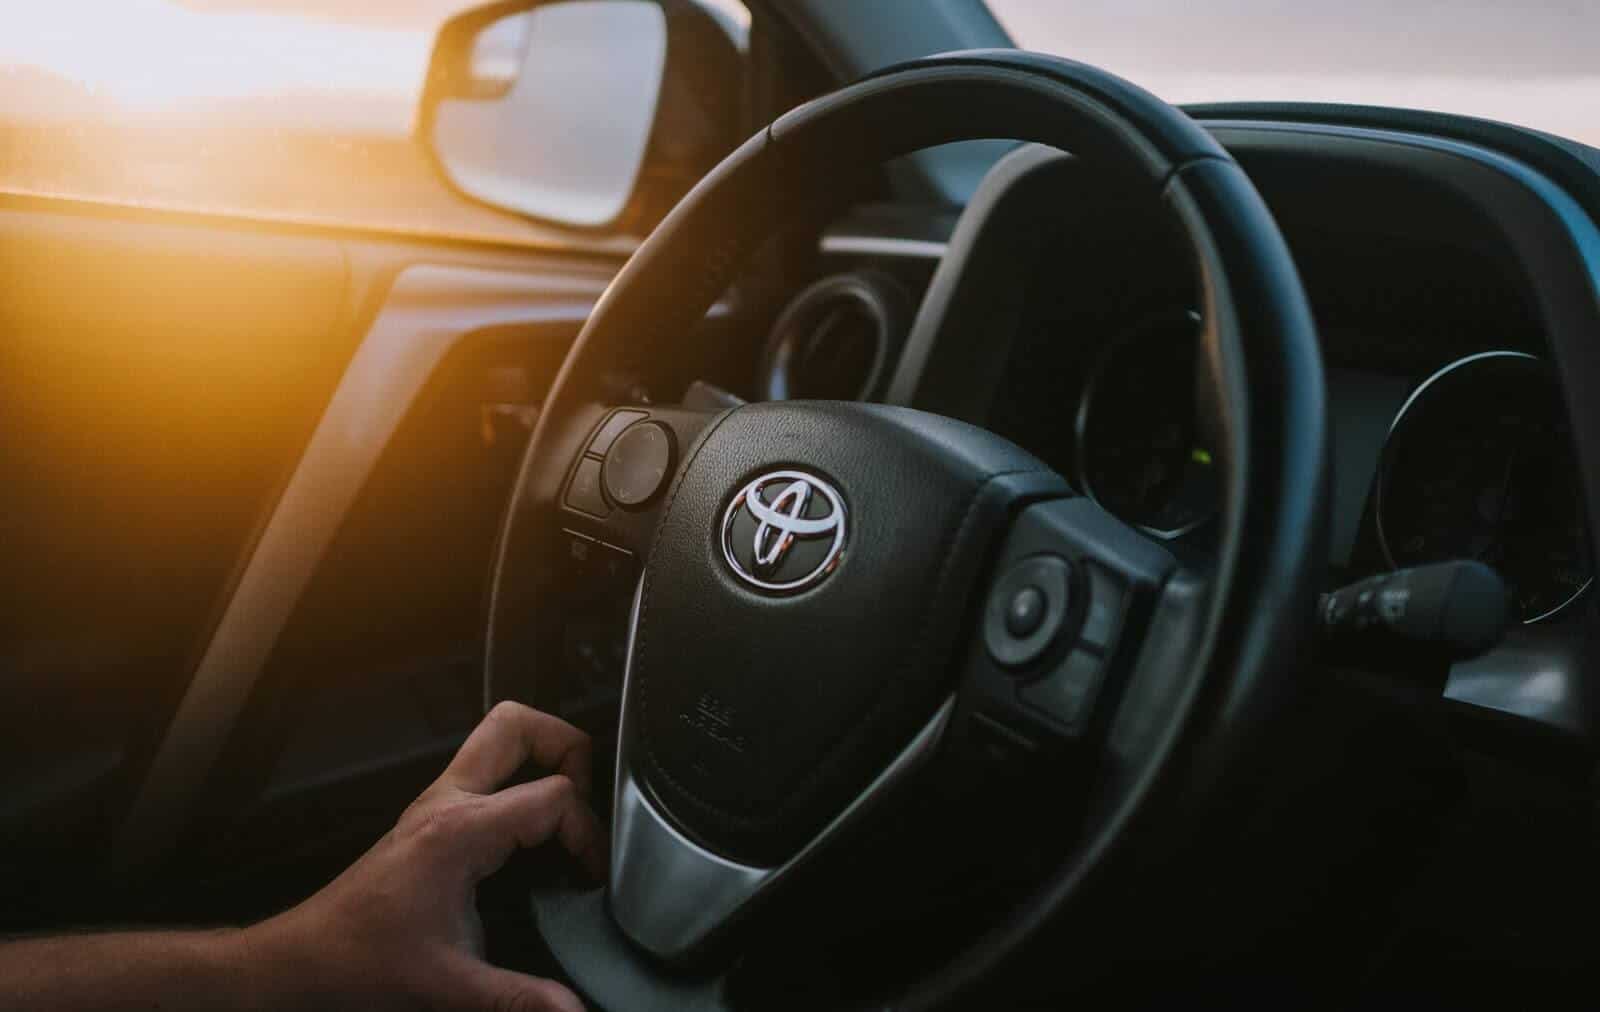 Person's hand on Toyota steering wheel